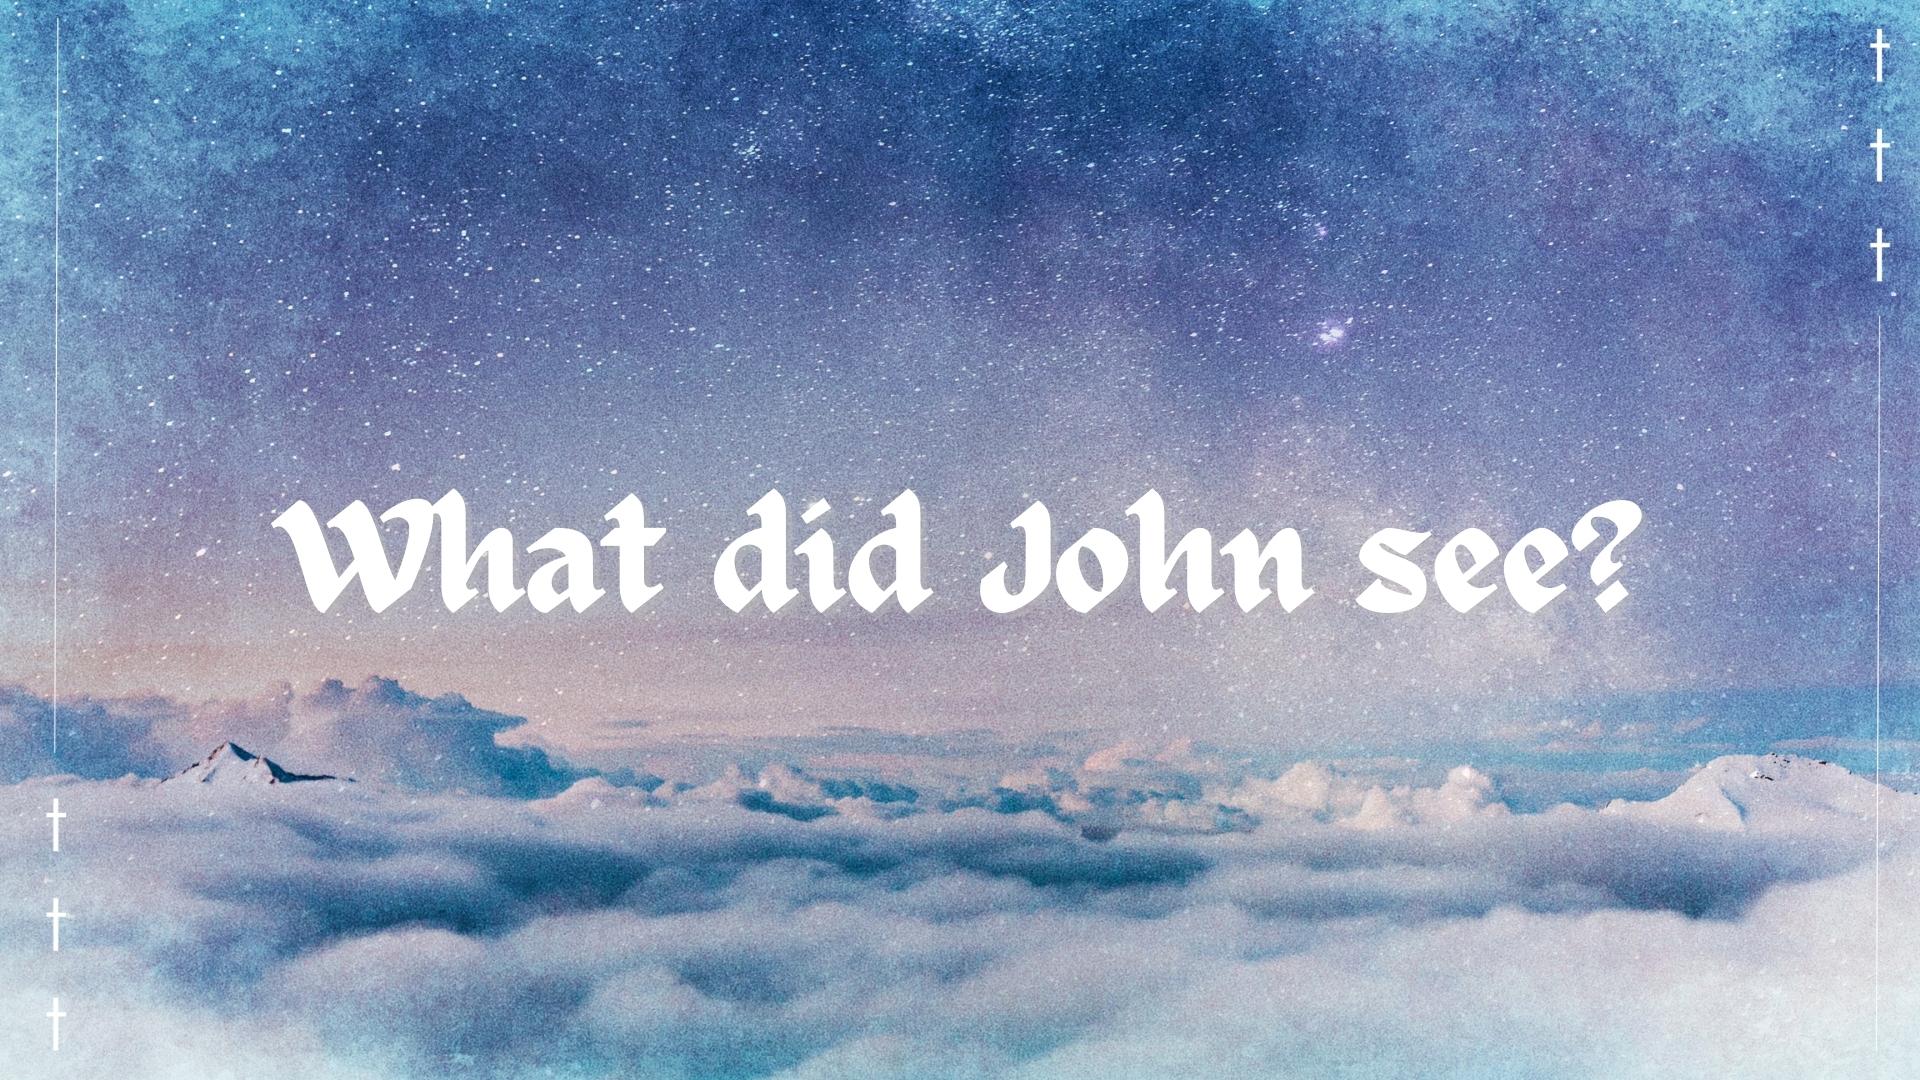 What Did John See?